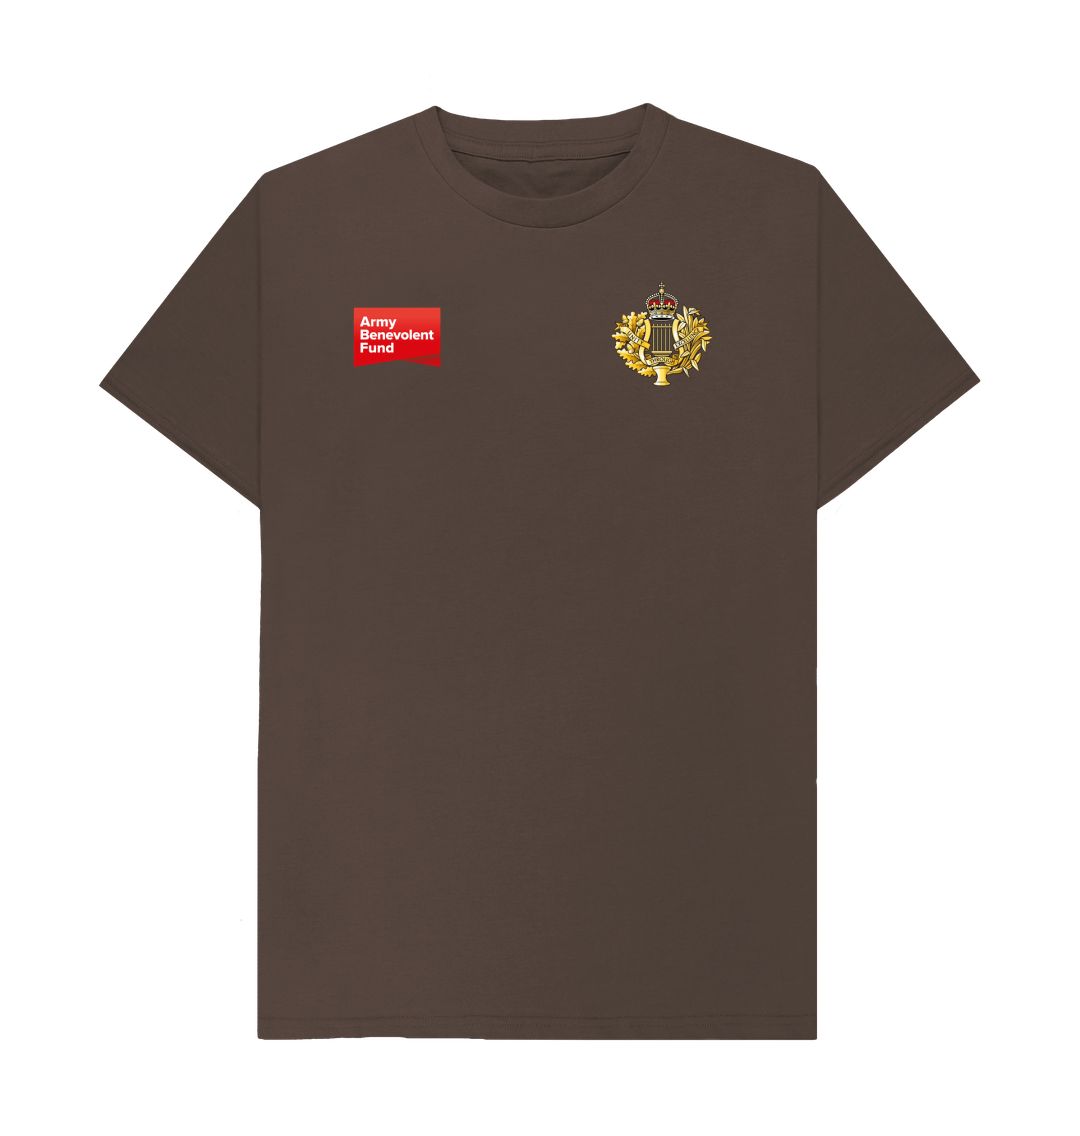 Corps of Army Music Unisex T-shirt - Army Benevolent Fund